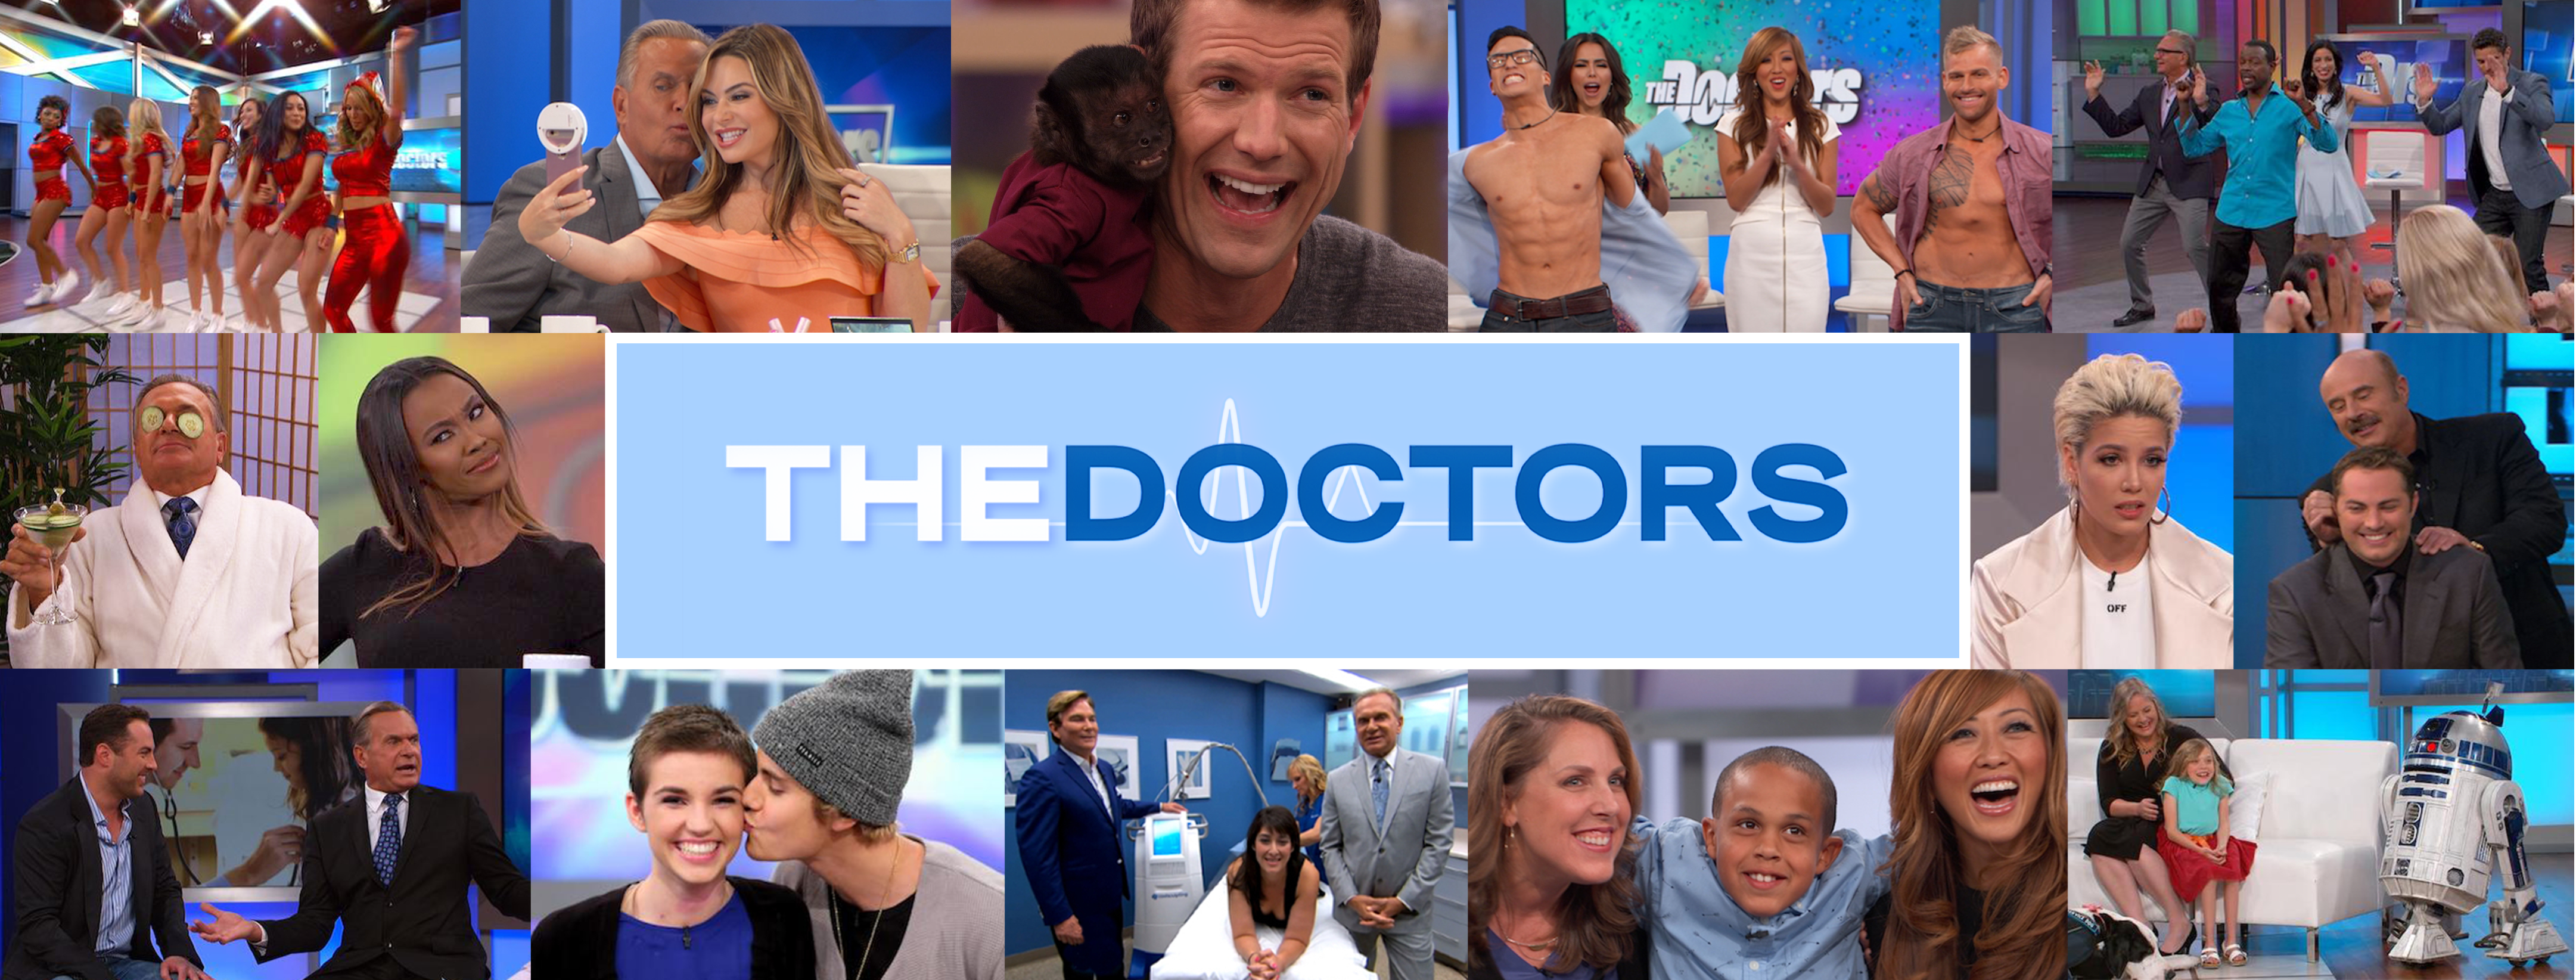 The 20 20 Diet Offers Clear Vision For Weight Loss The Doctors Tv Show